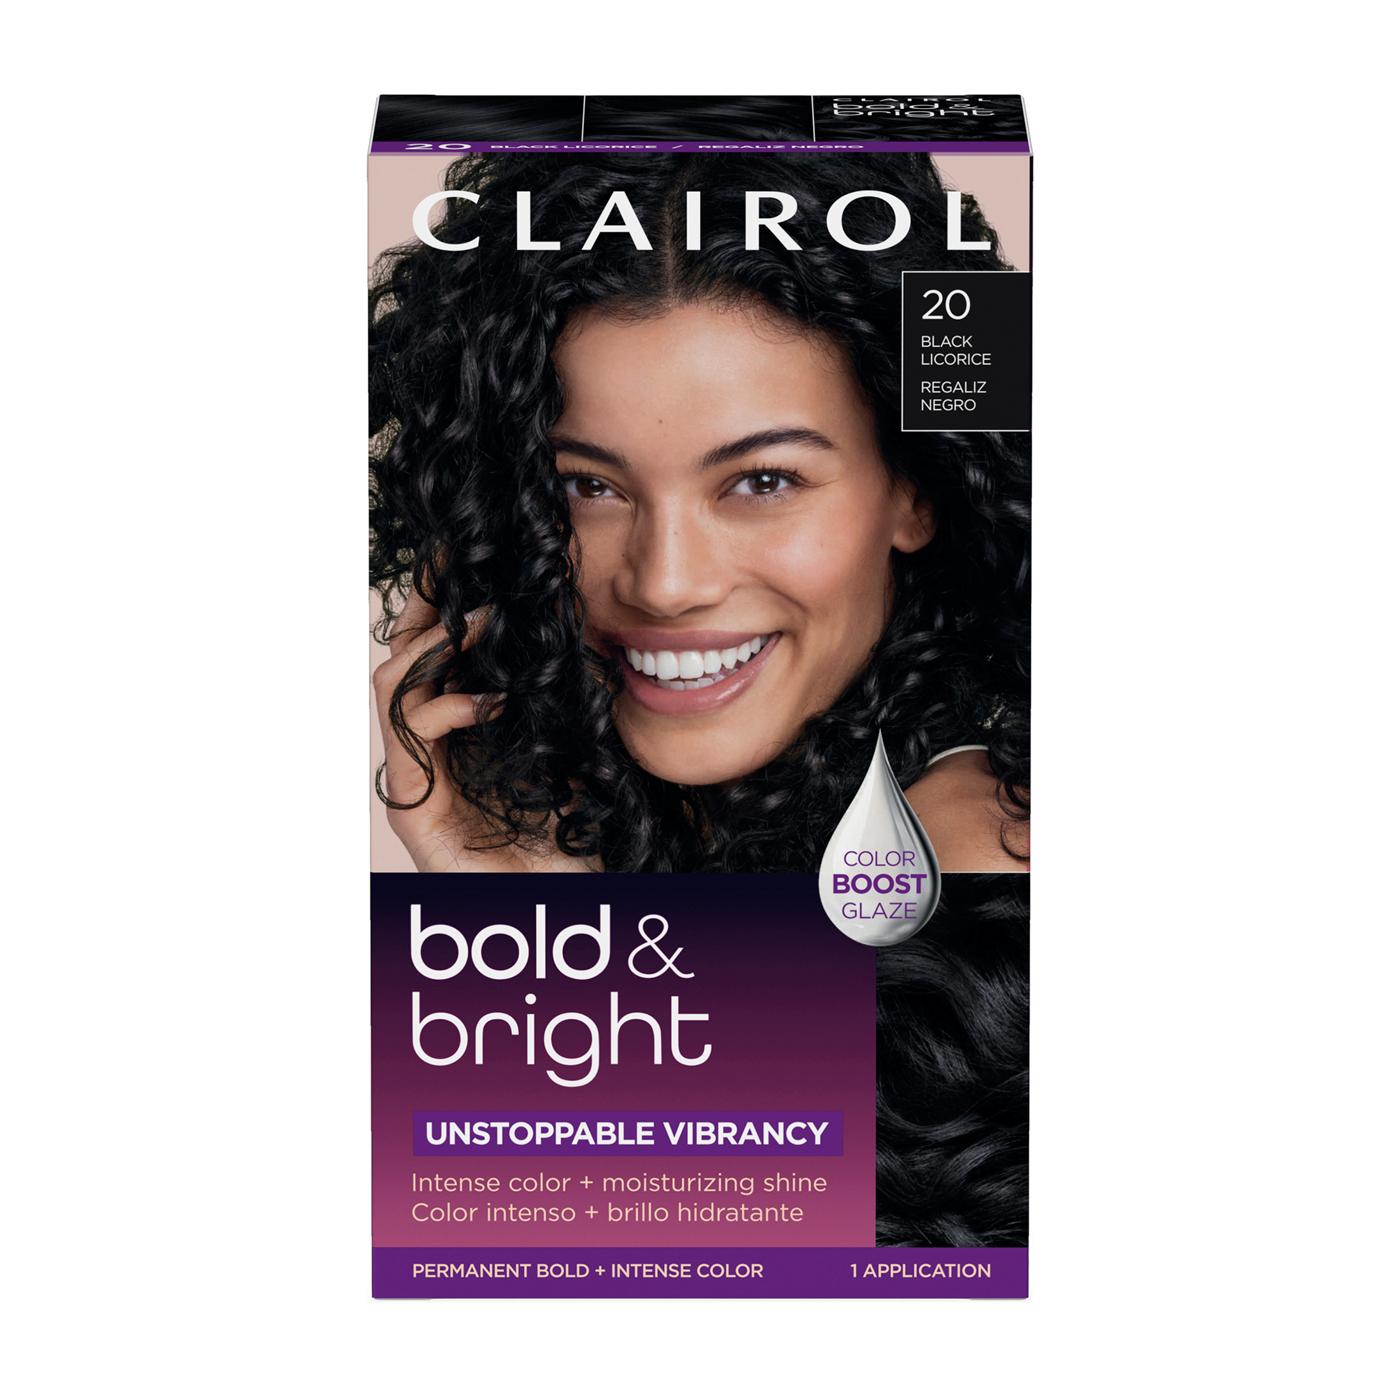 Clairol Bold & Bright Permanent Hair Color - 20 Black Licorice; image 1 of 11